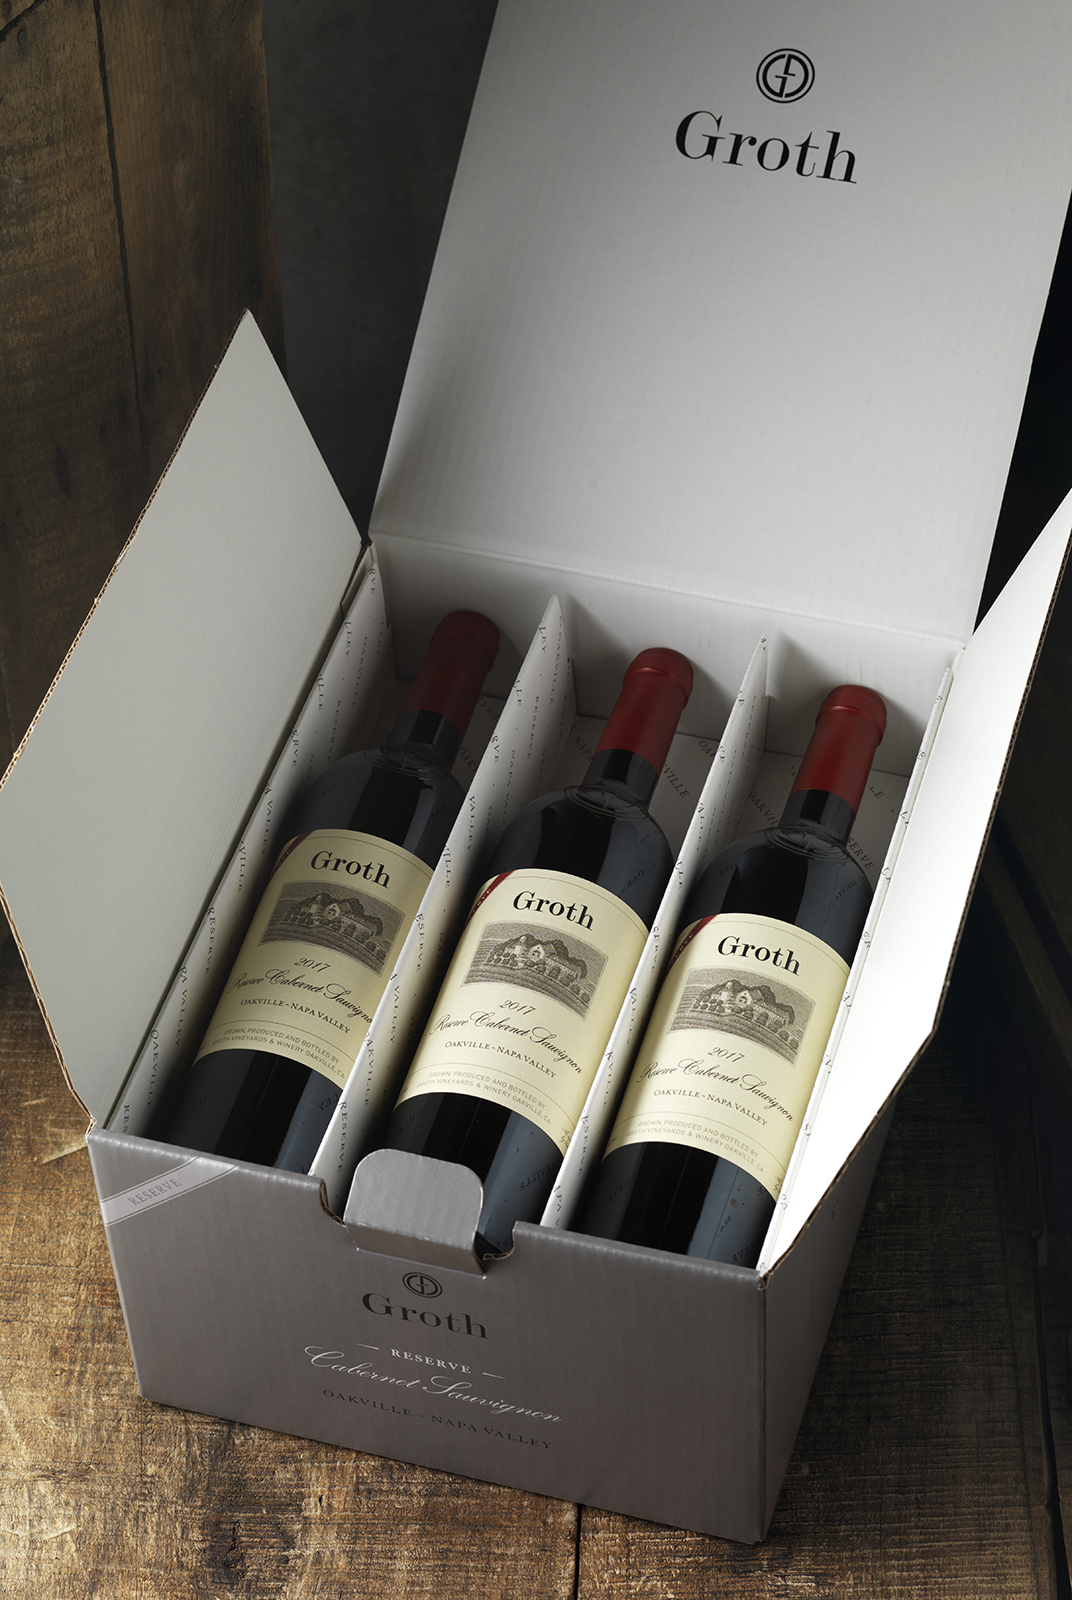 Groth Wine Shipper Design Shown Open with 3 Wine Bottles